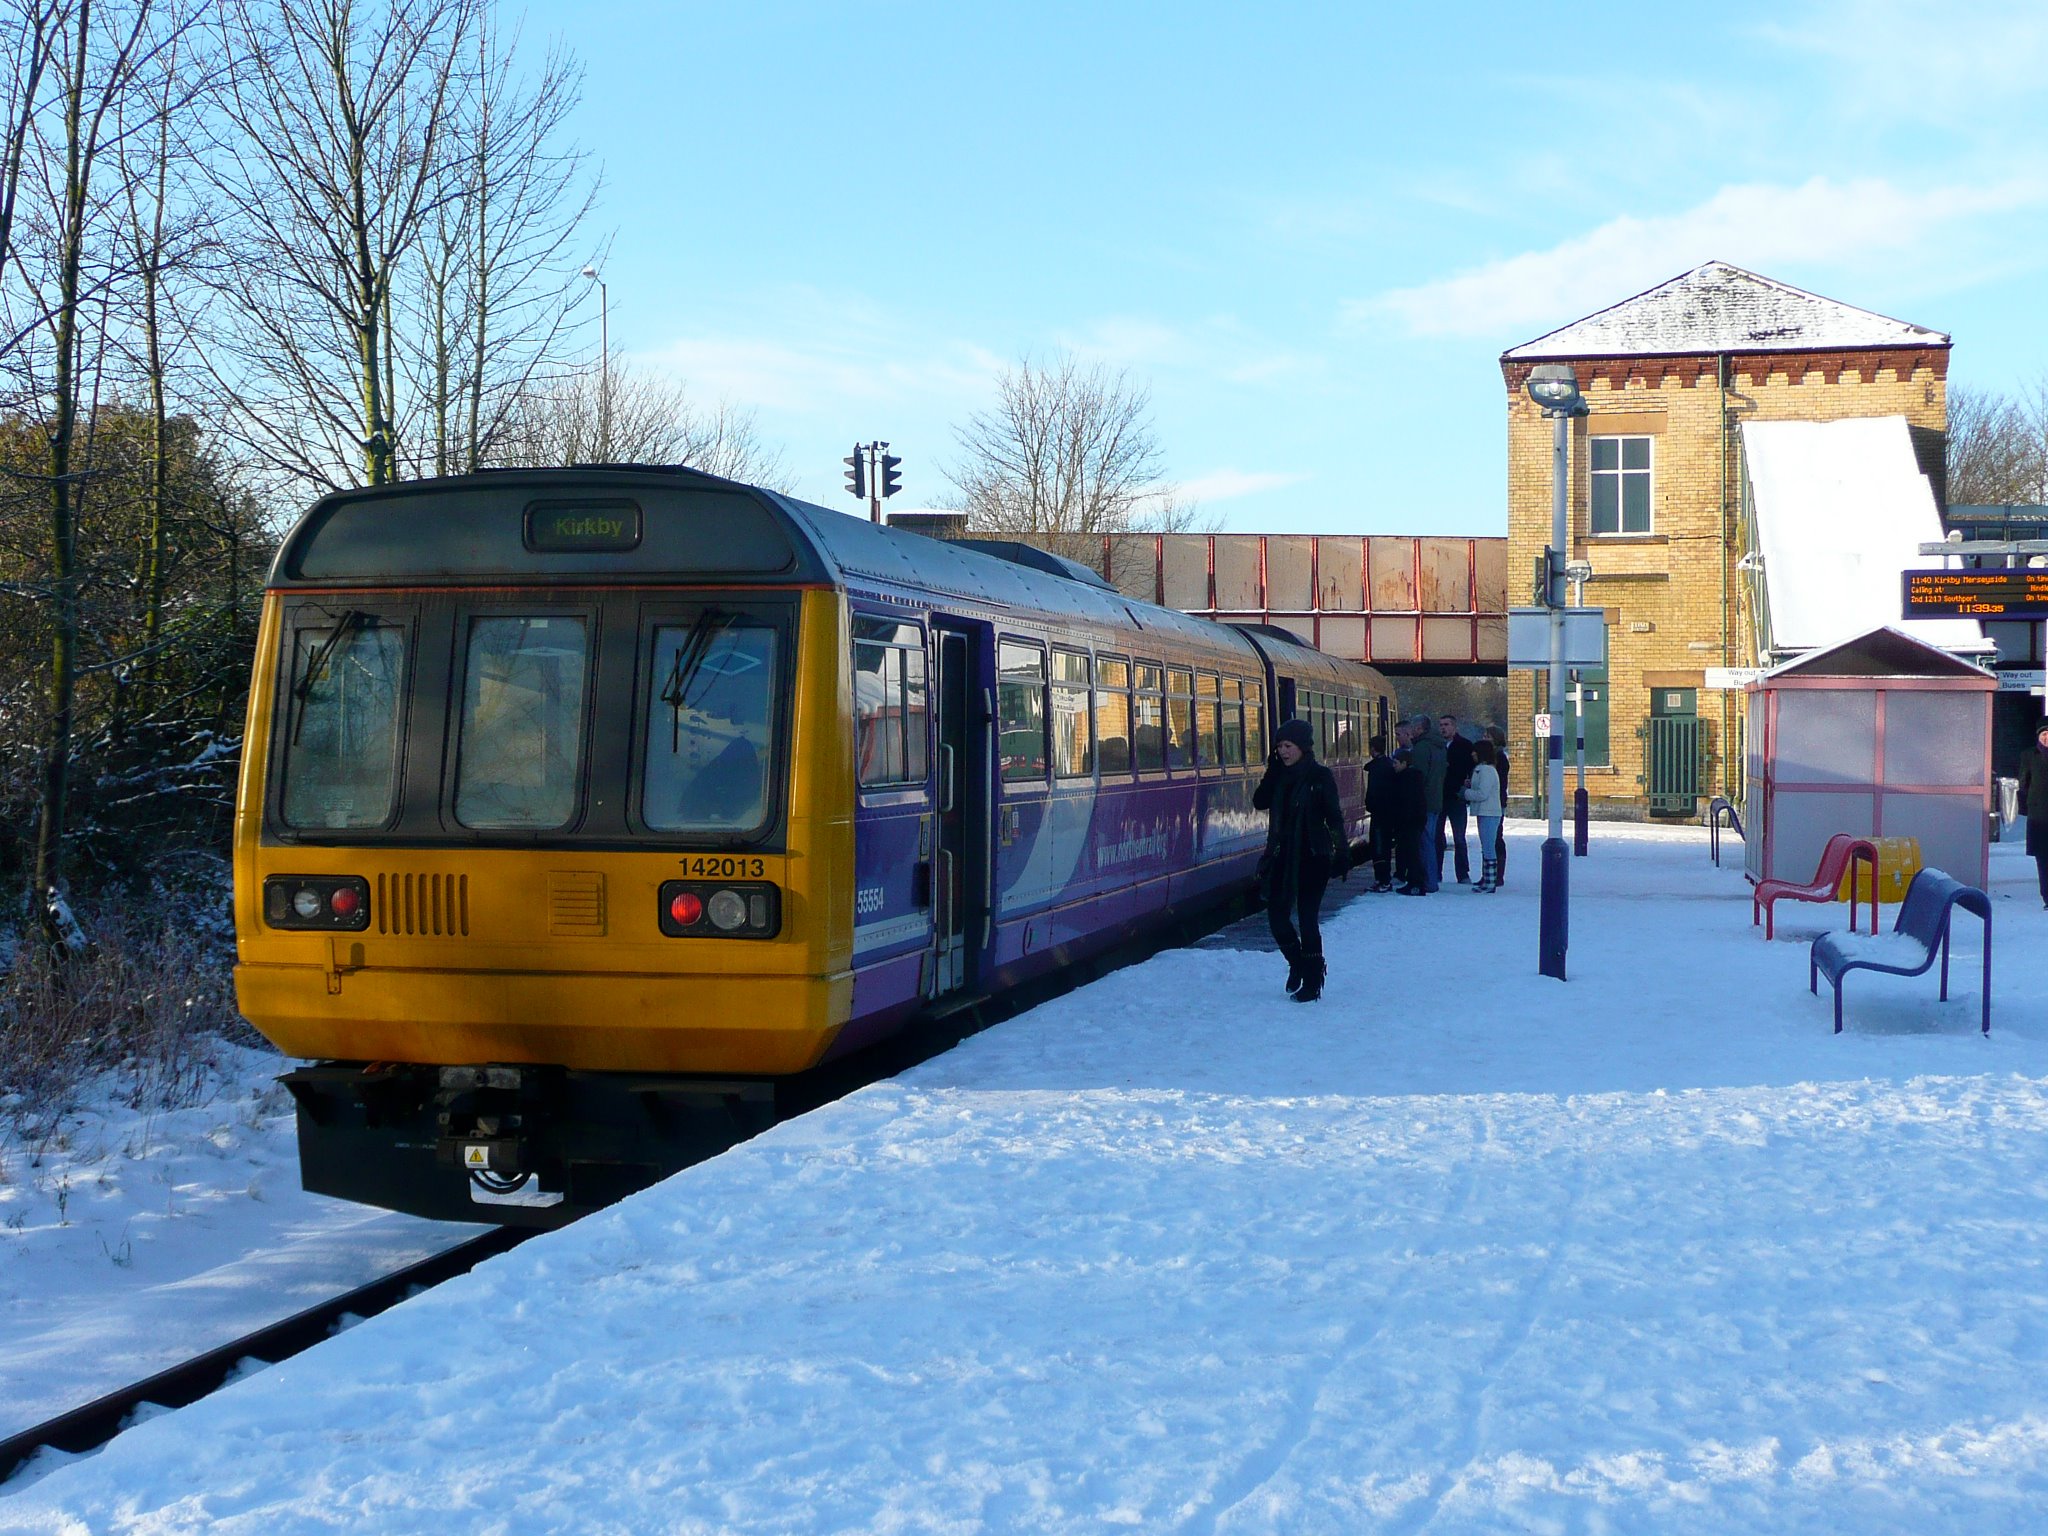 A photo of Daisy Hill Station